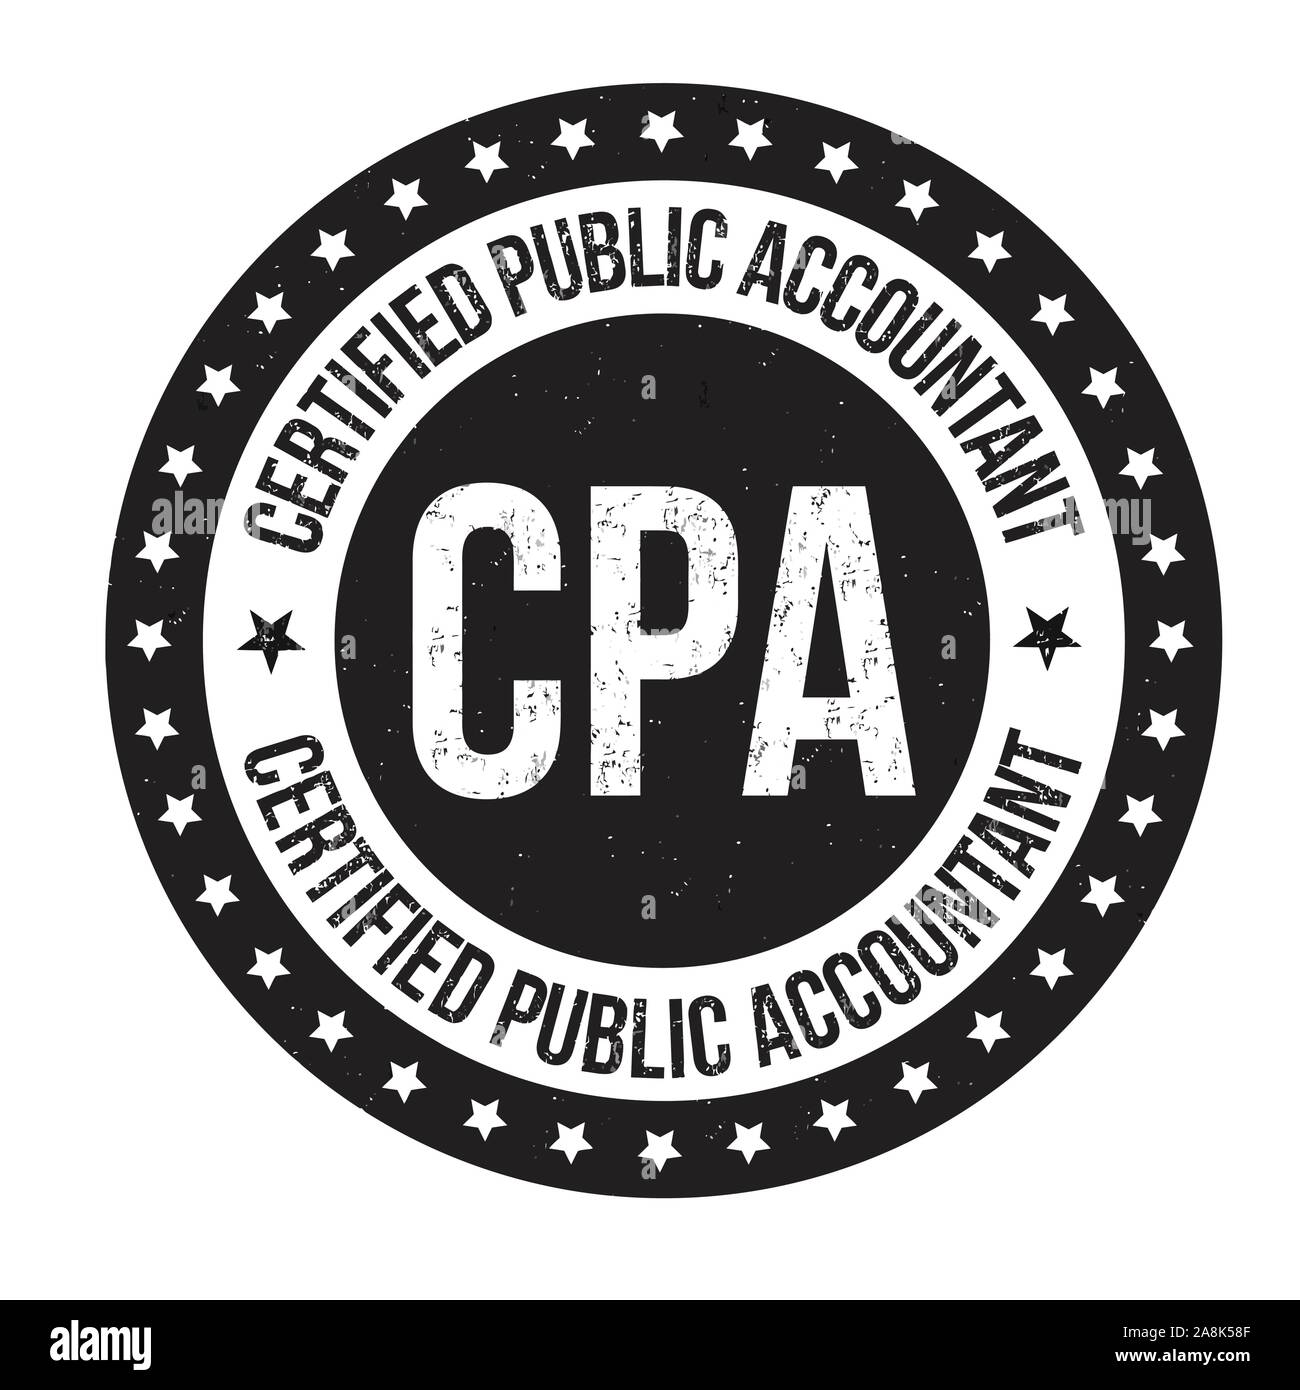 What Is A Certified Public Accountant